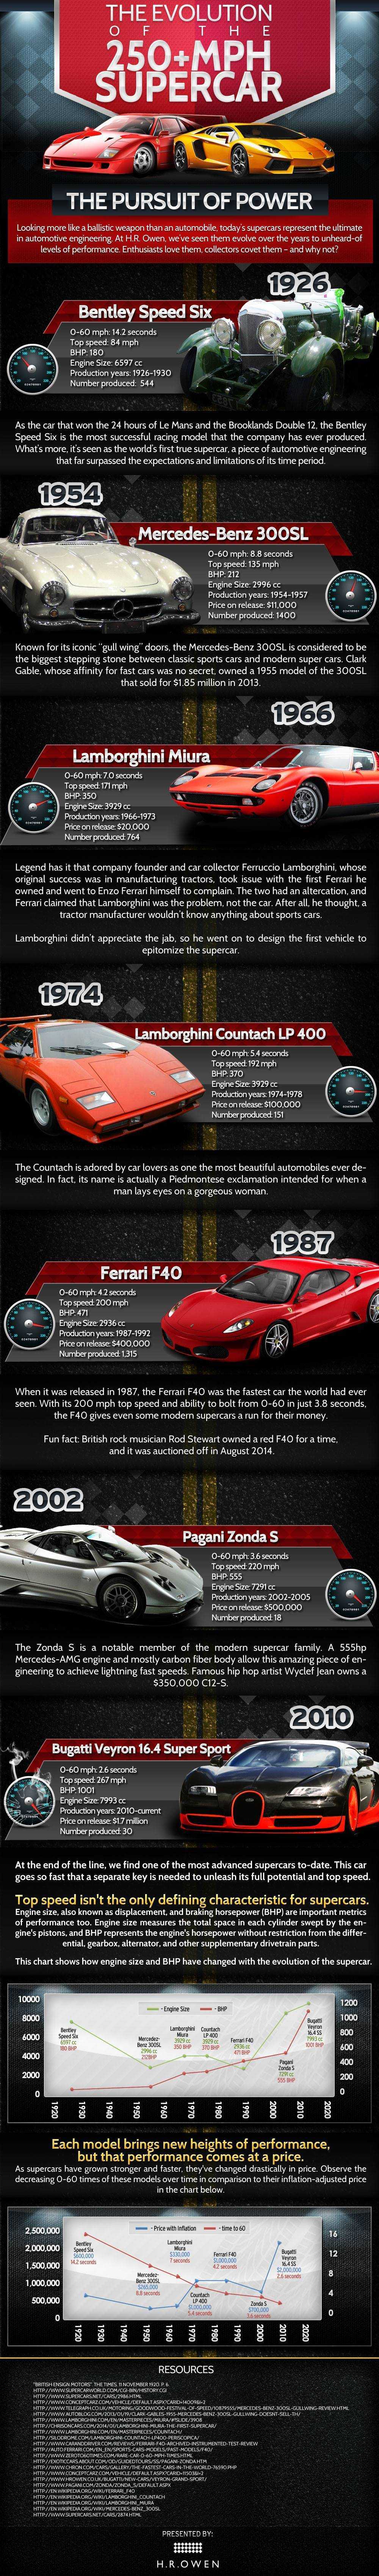 The evolution of supercars at speeds exceeding 250 mph [infographic]